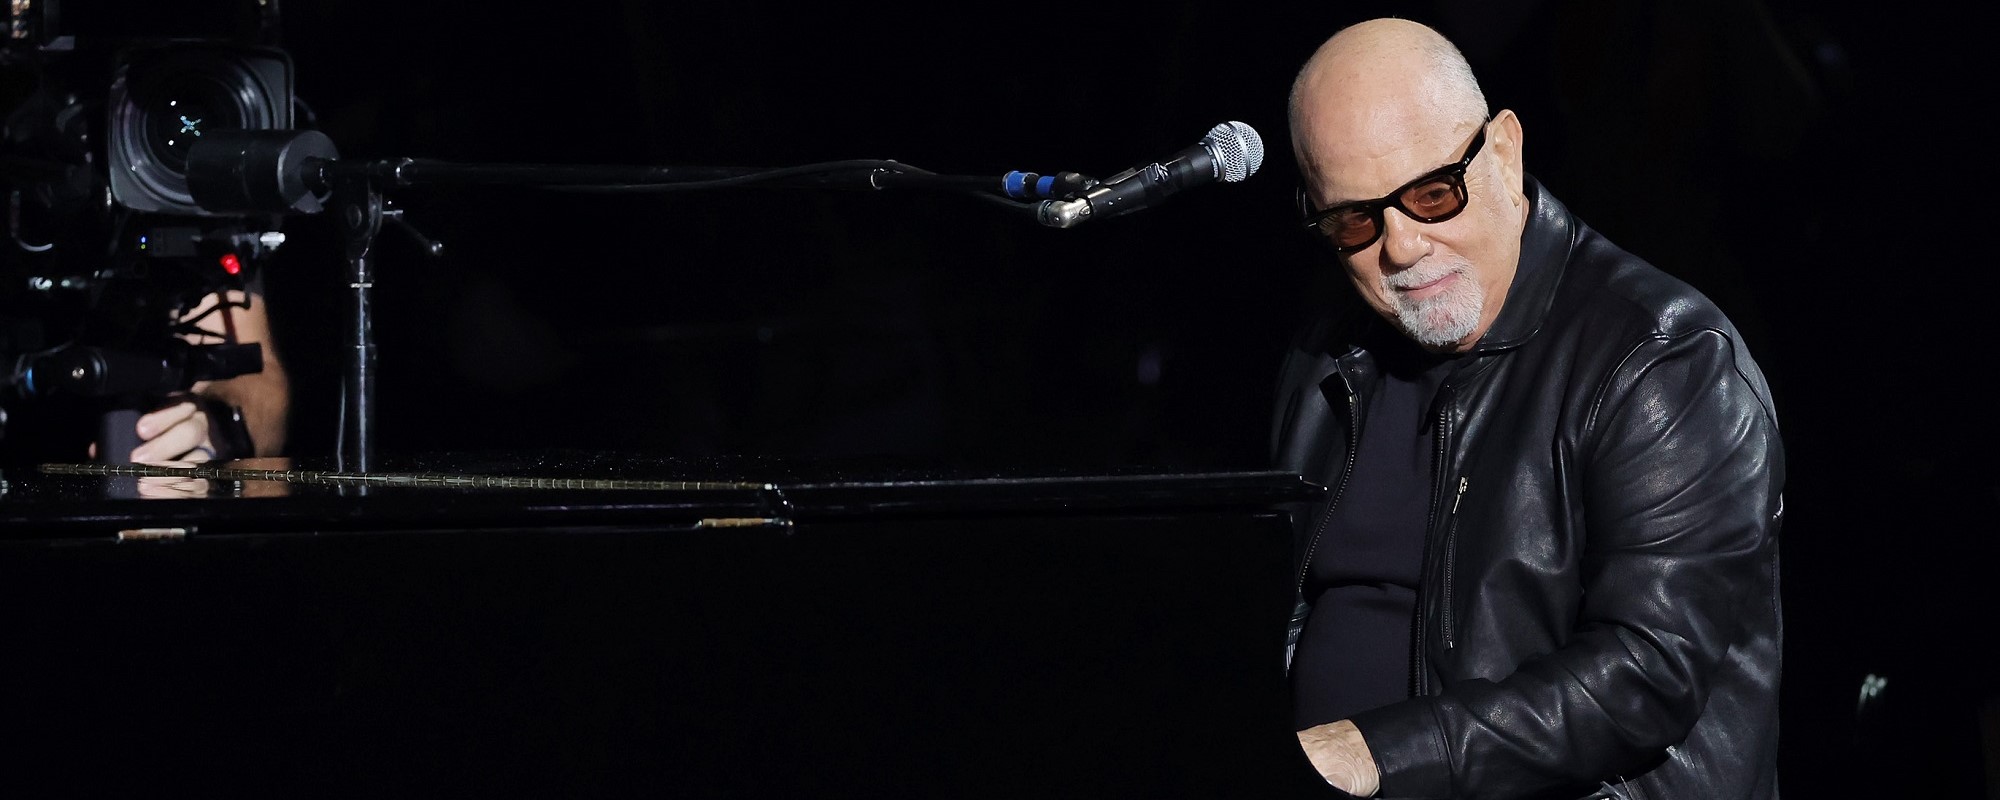 How to Watch: Billy Joel Appearing on ‘The Late Show with Stephen Colbert’ This Week